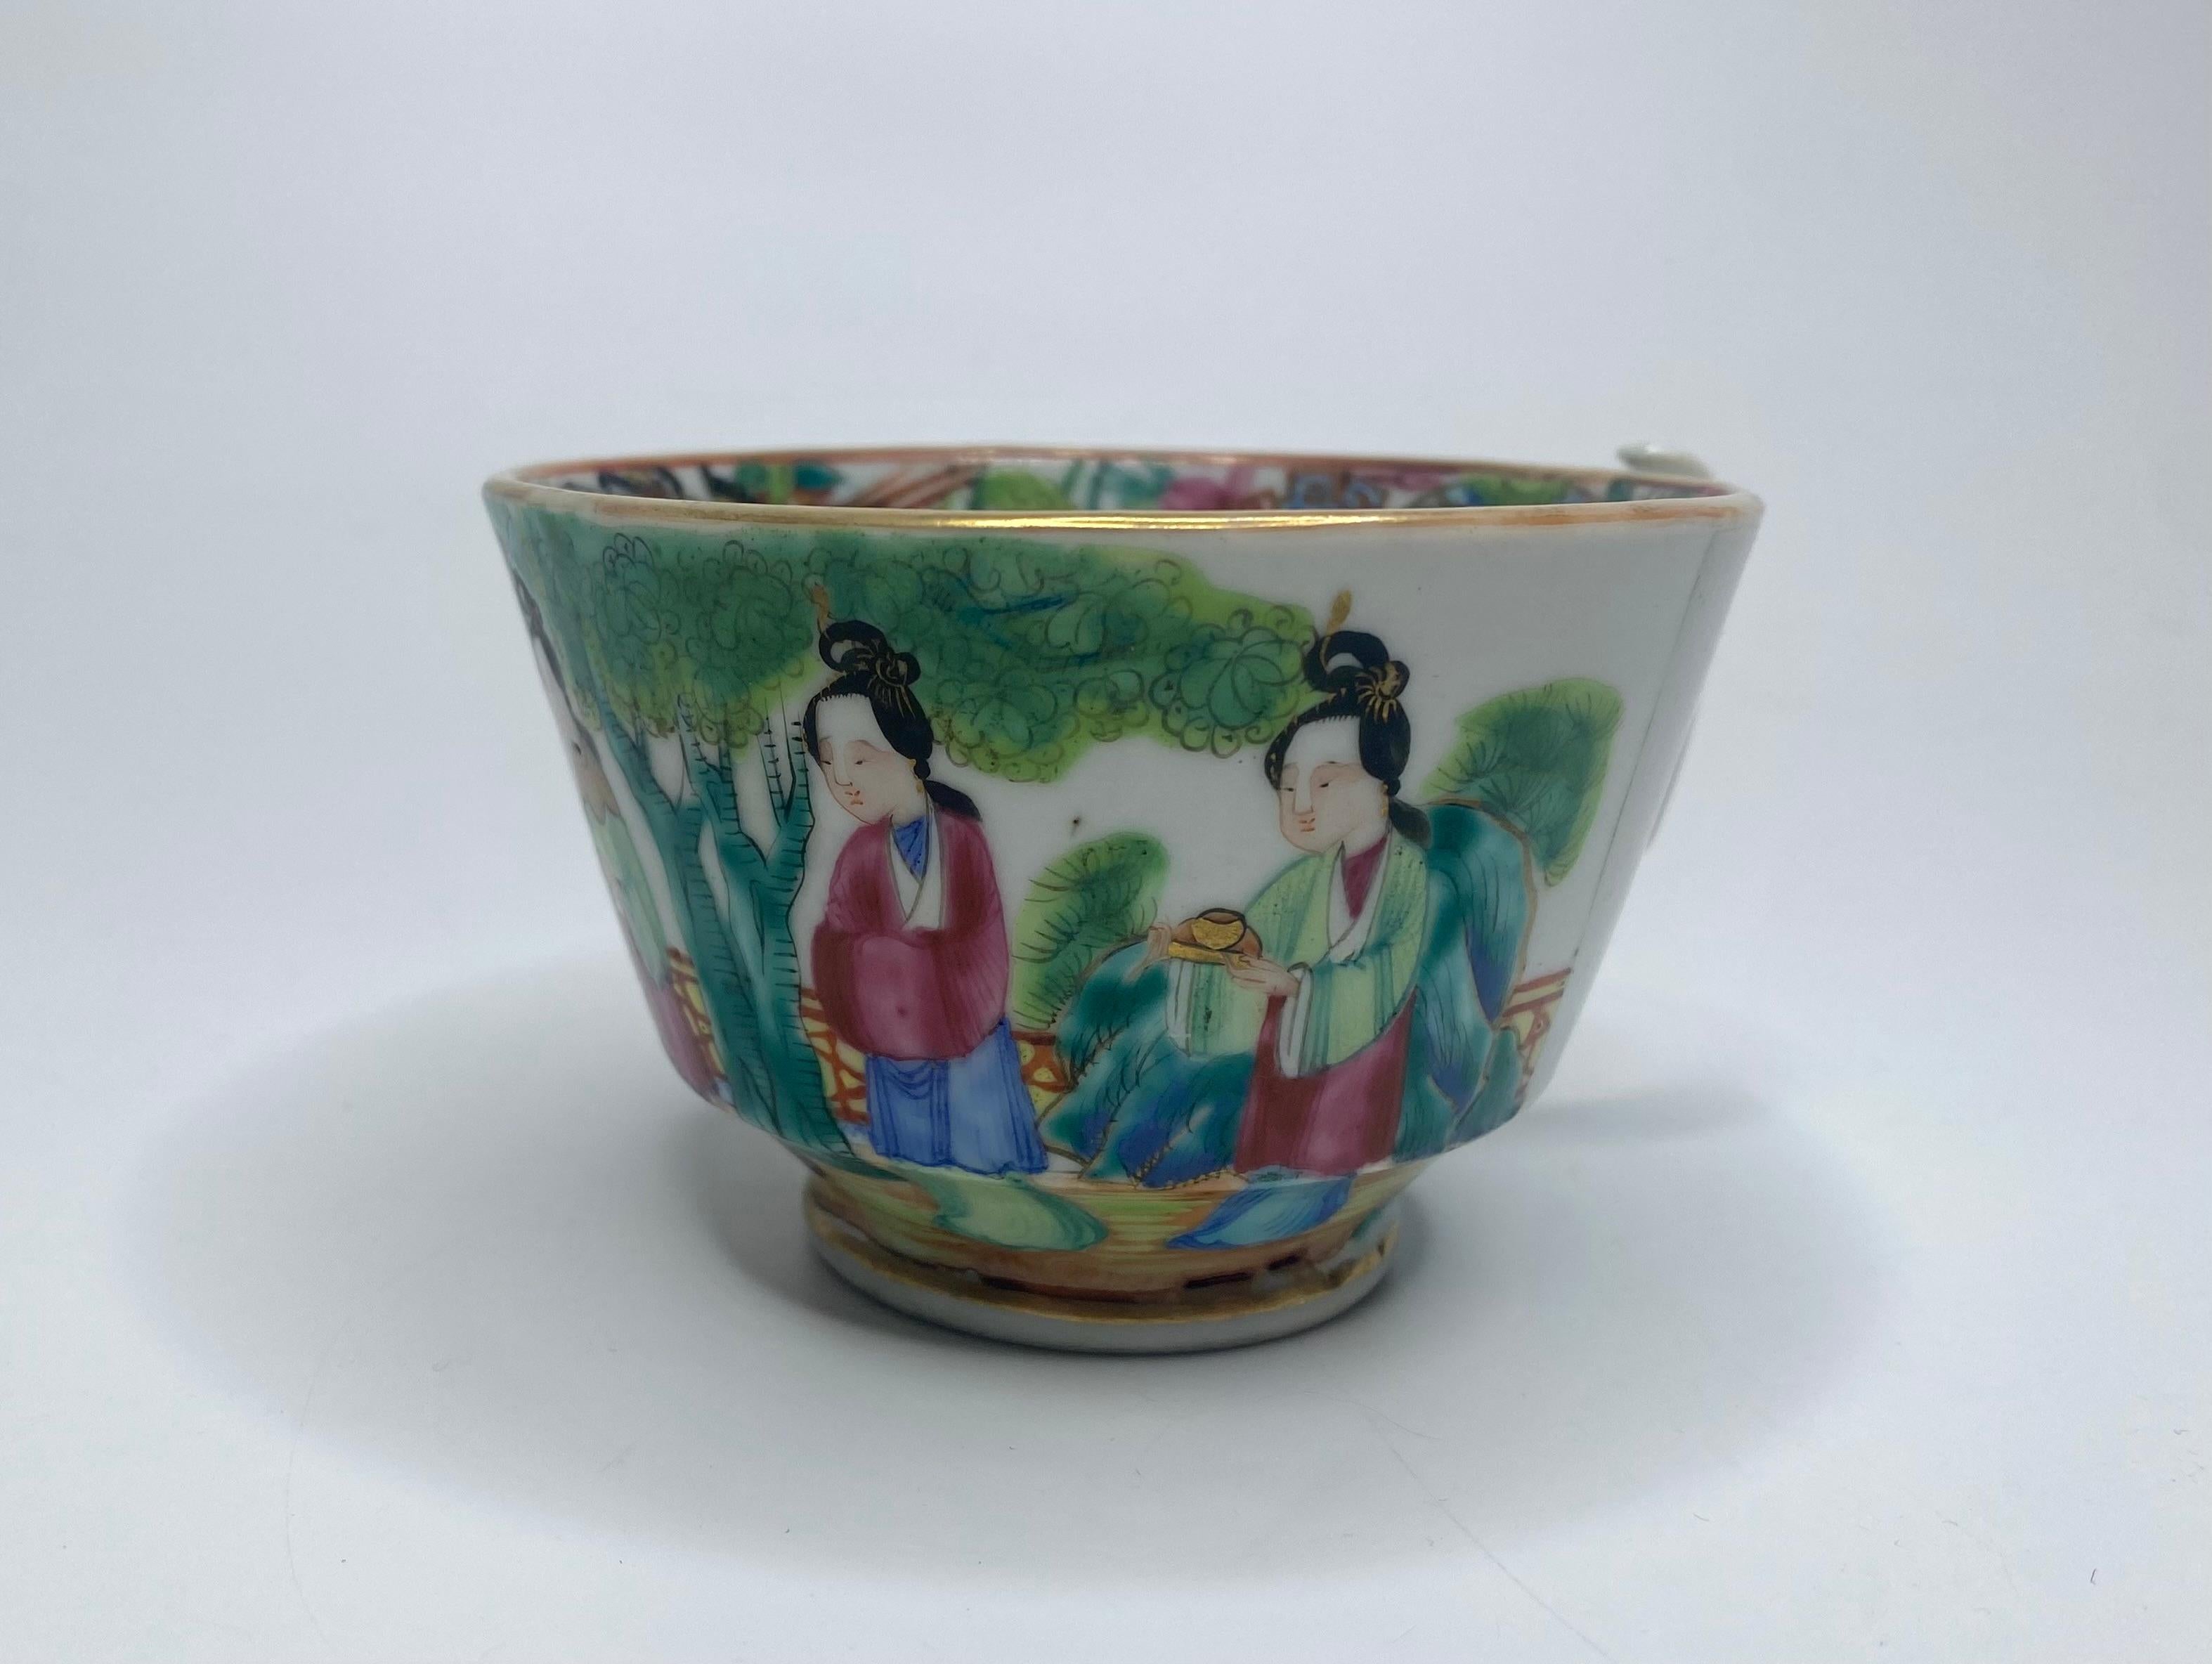 Chinese Canton porcelain cup & saucer, c. 1850. Qing dynasty. 2